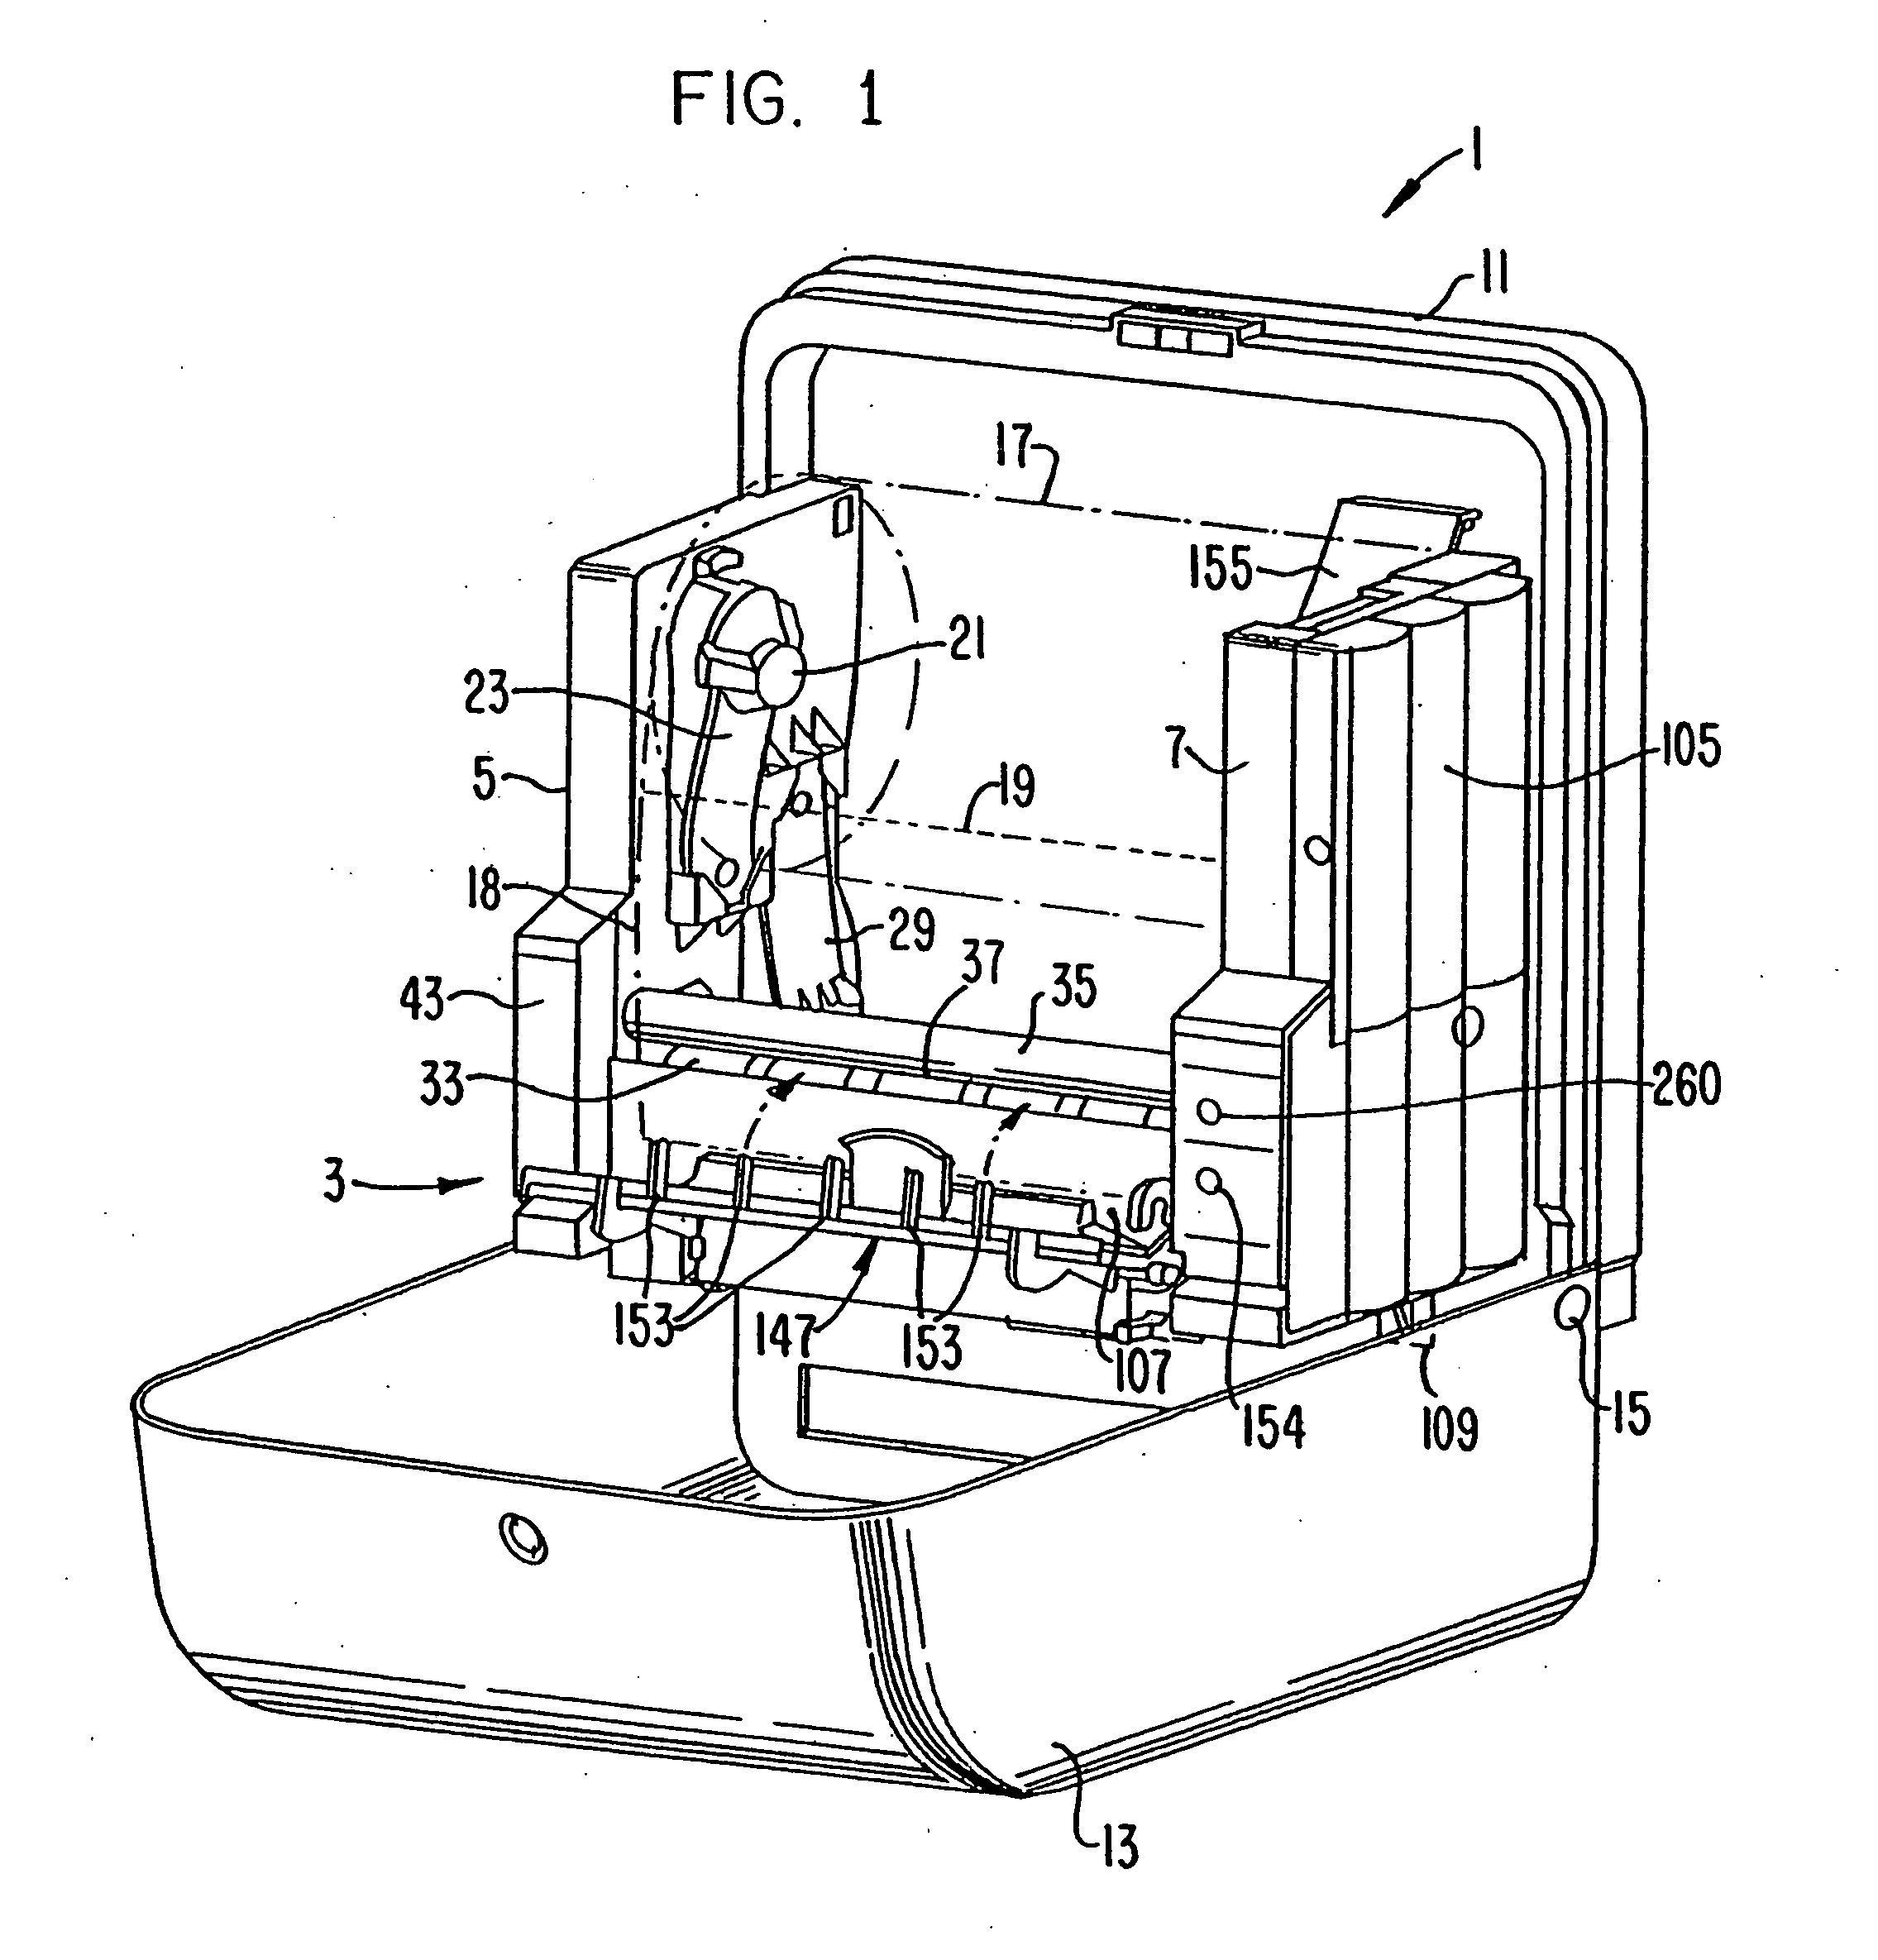 Apparatus and methods usable in connection with dispensing flexible sheet material from a roll